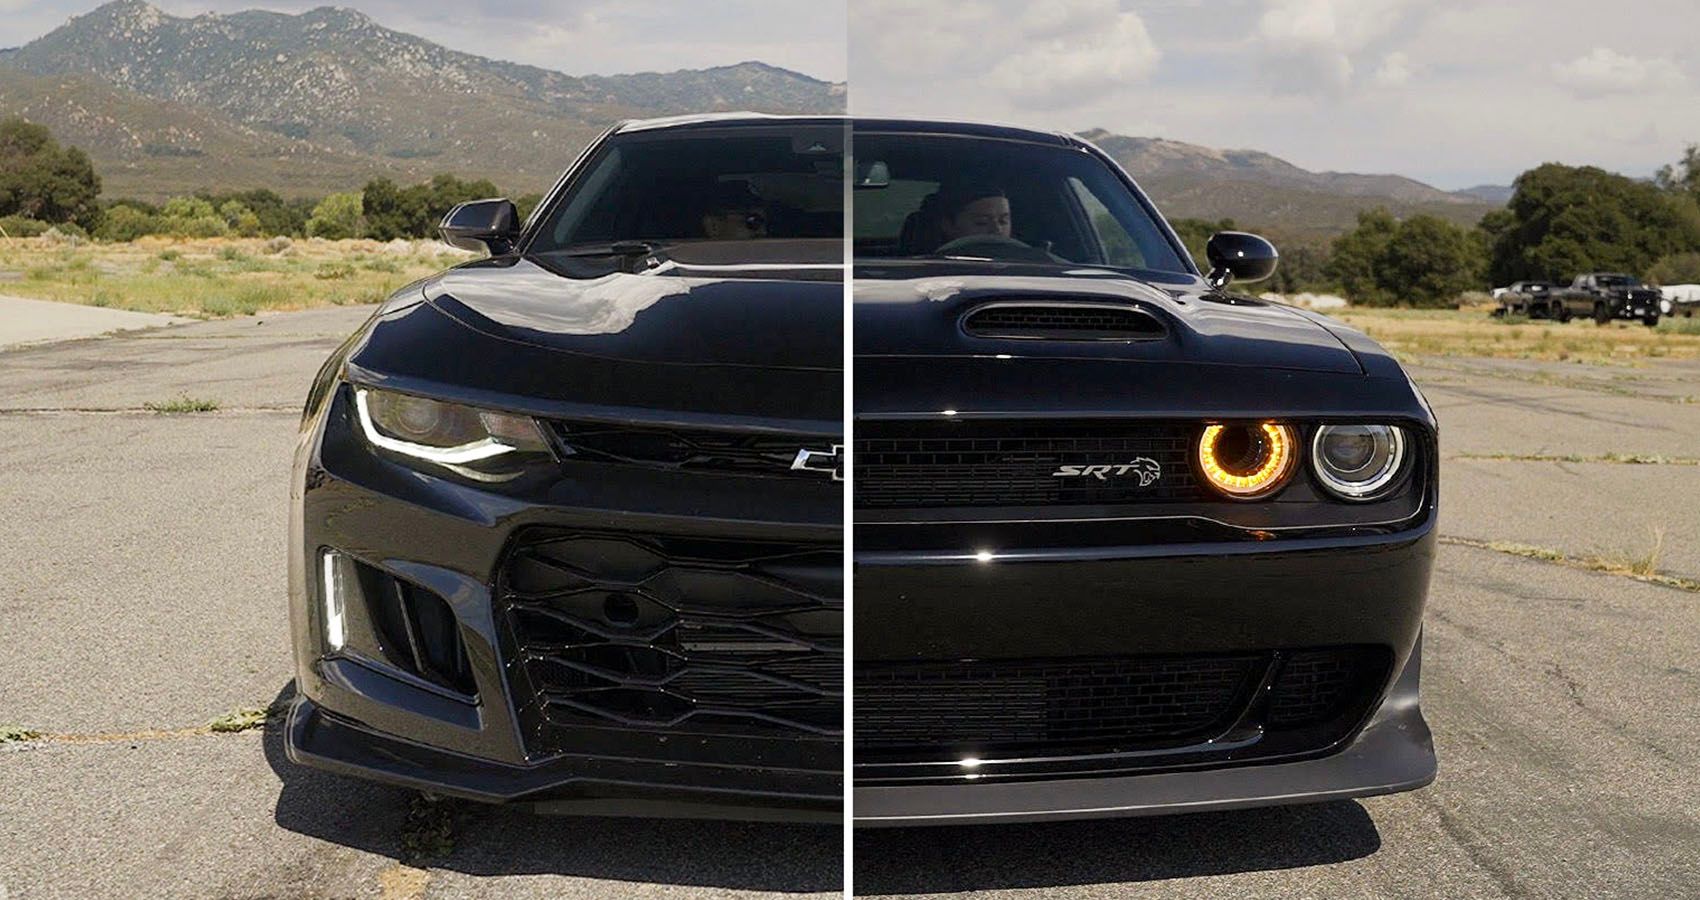 Supercharged V8 Showdown: Camaro ZL1 Vs Challenger Hellcat, Plus $10,000 Giveaway!